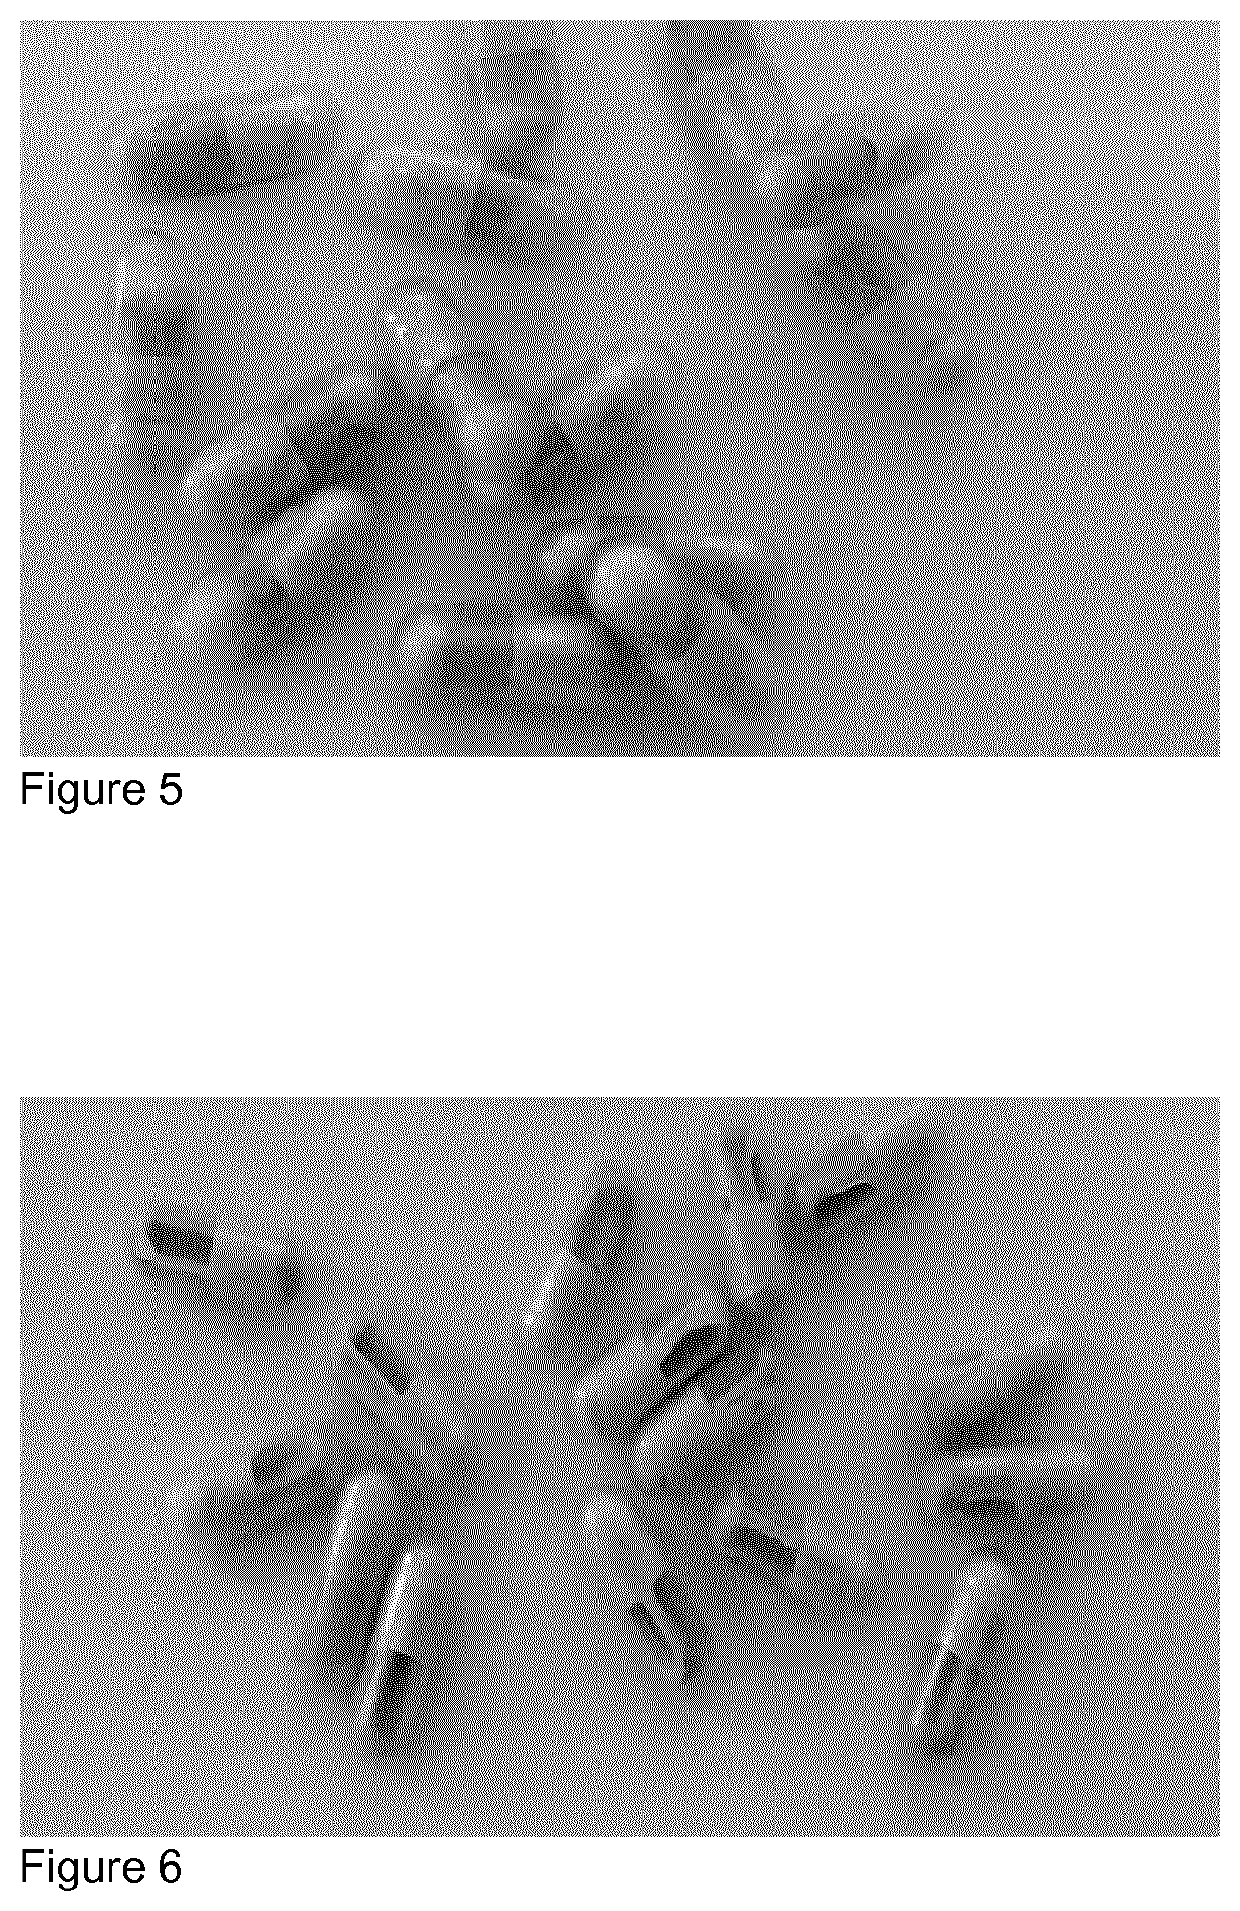 Stable capsules with fecal microbiota or a culture of microorganisms